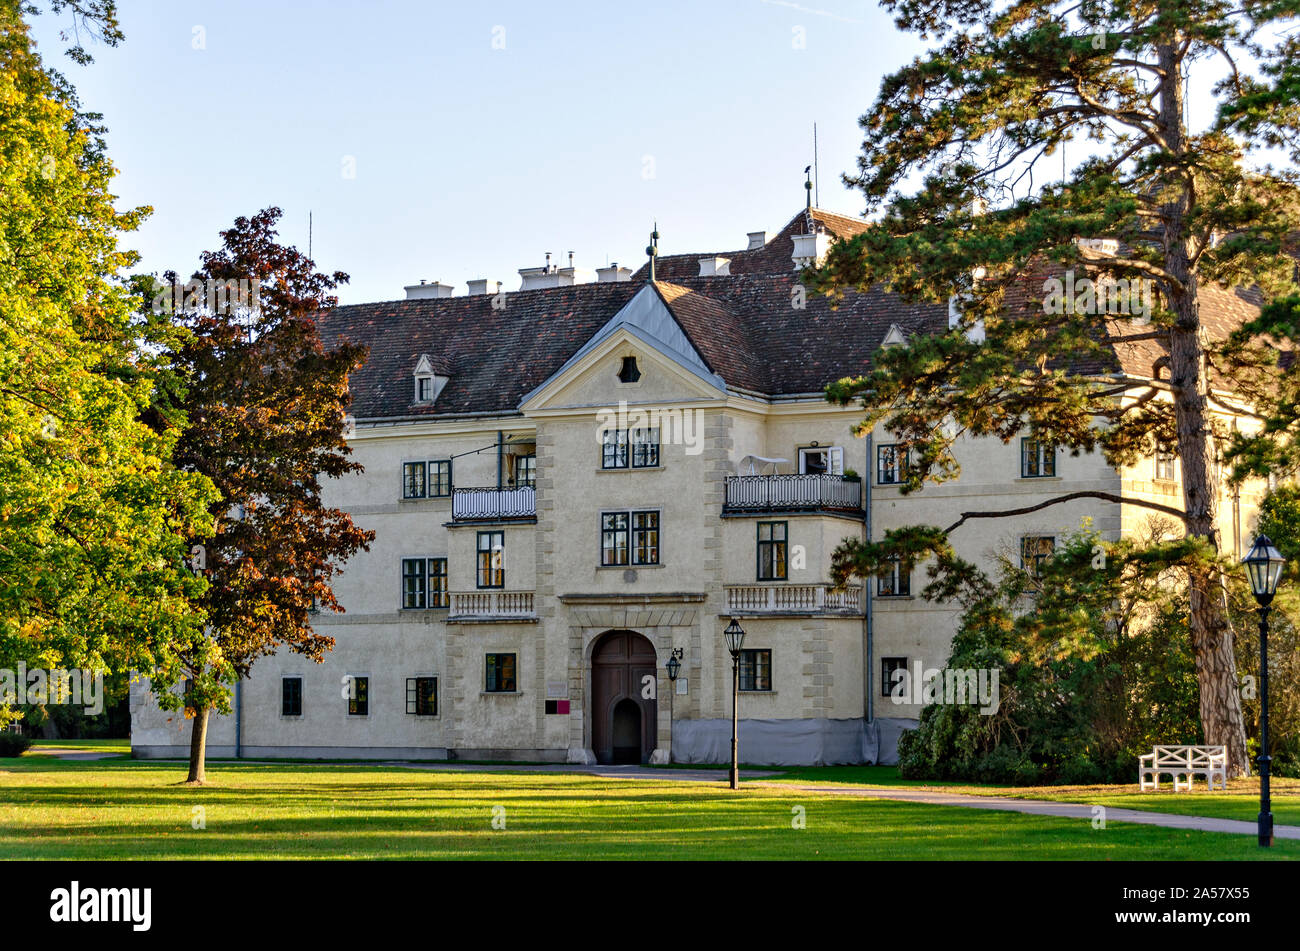 Old palace in the garden of Laxenburg, Austria Stock Photo